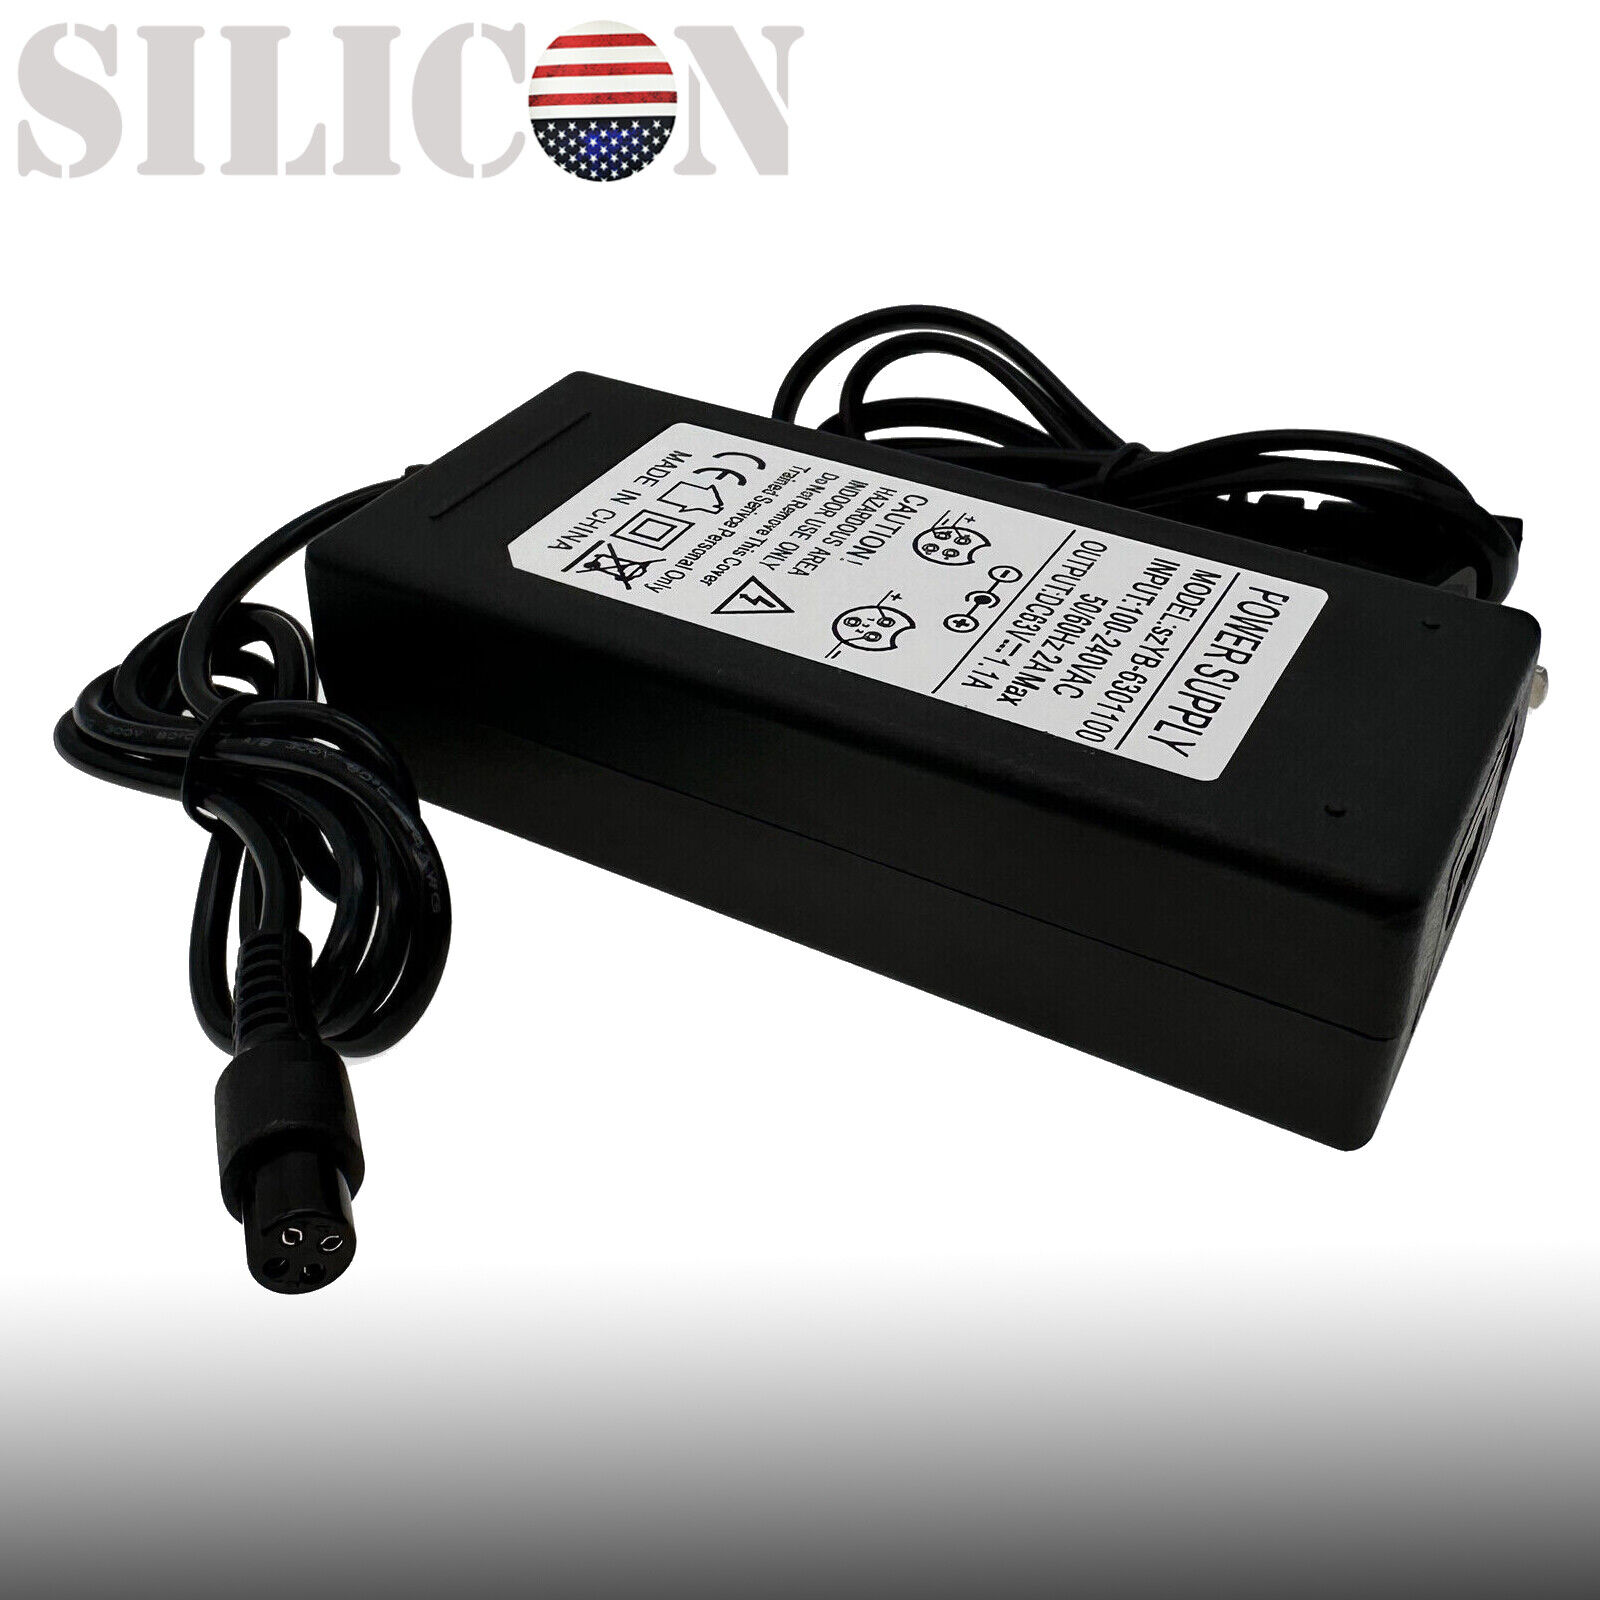 63V 1.1A Battery Charger Assembly For Ninebot Segway MiNi Pro MiniLITE Scooter 63V 1.1A Battery Charger Assembly For Ni